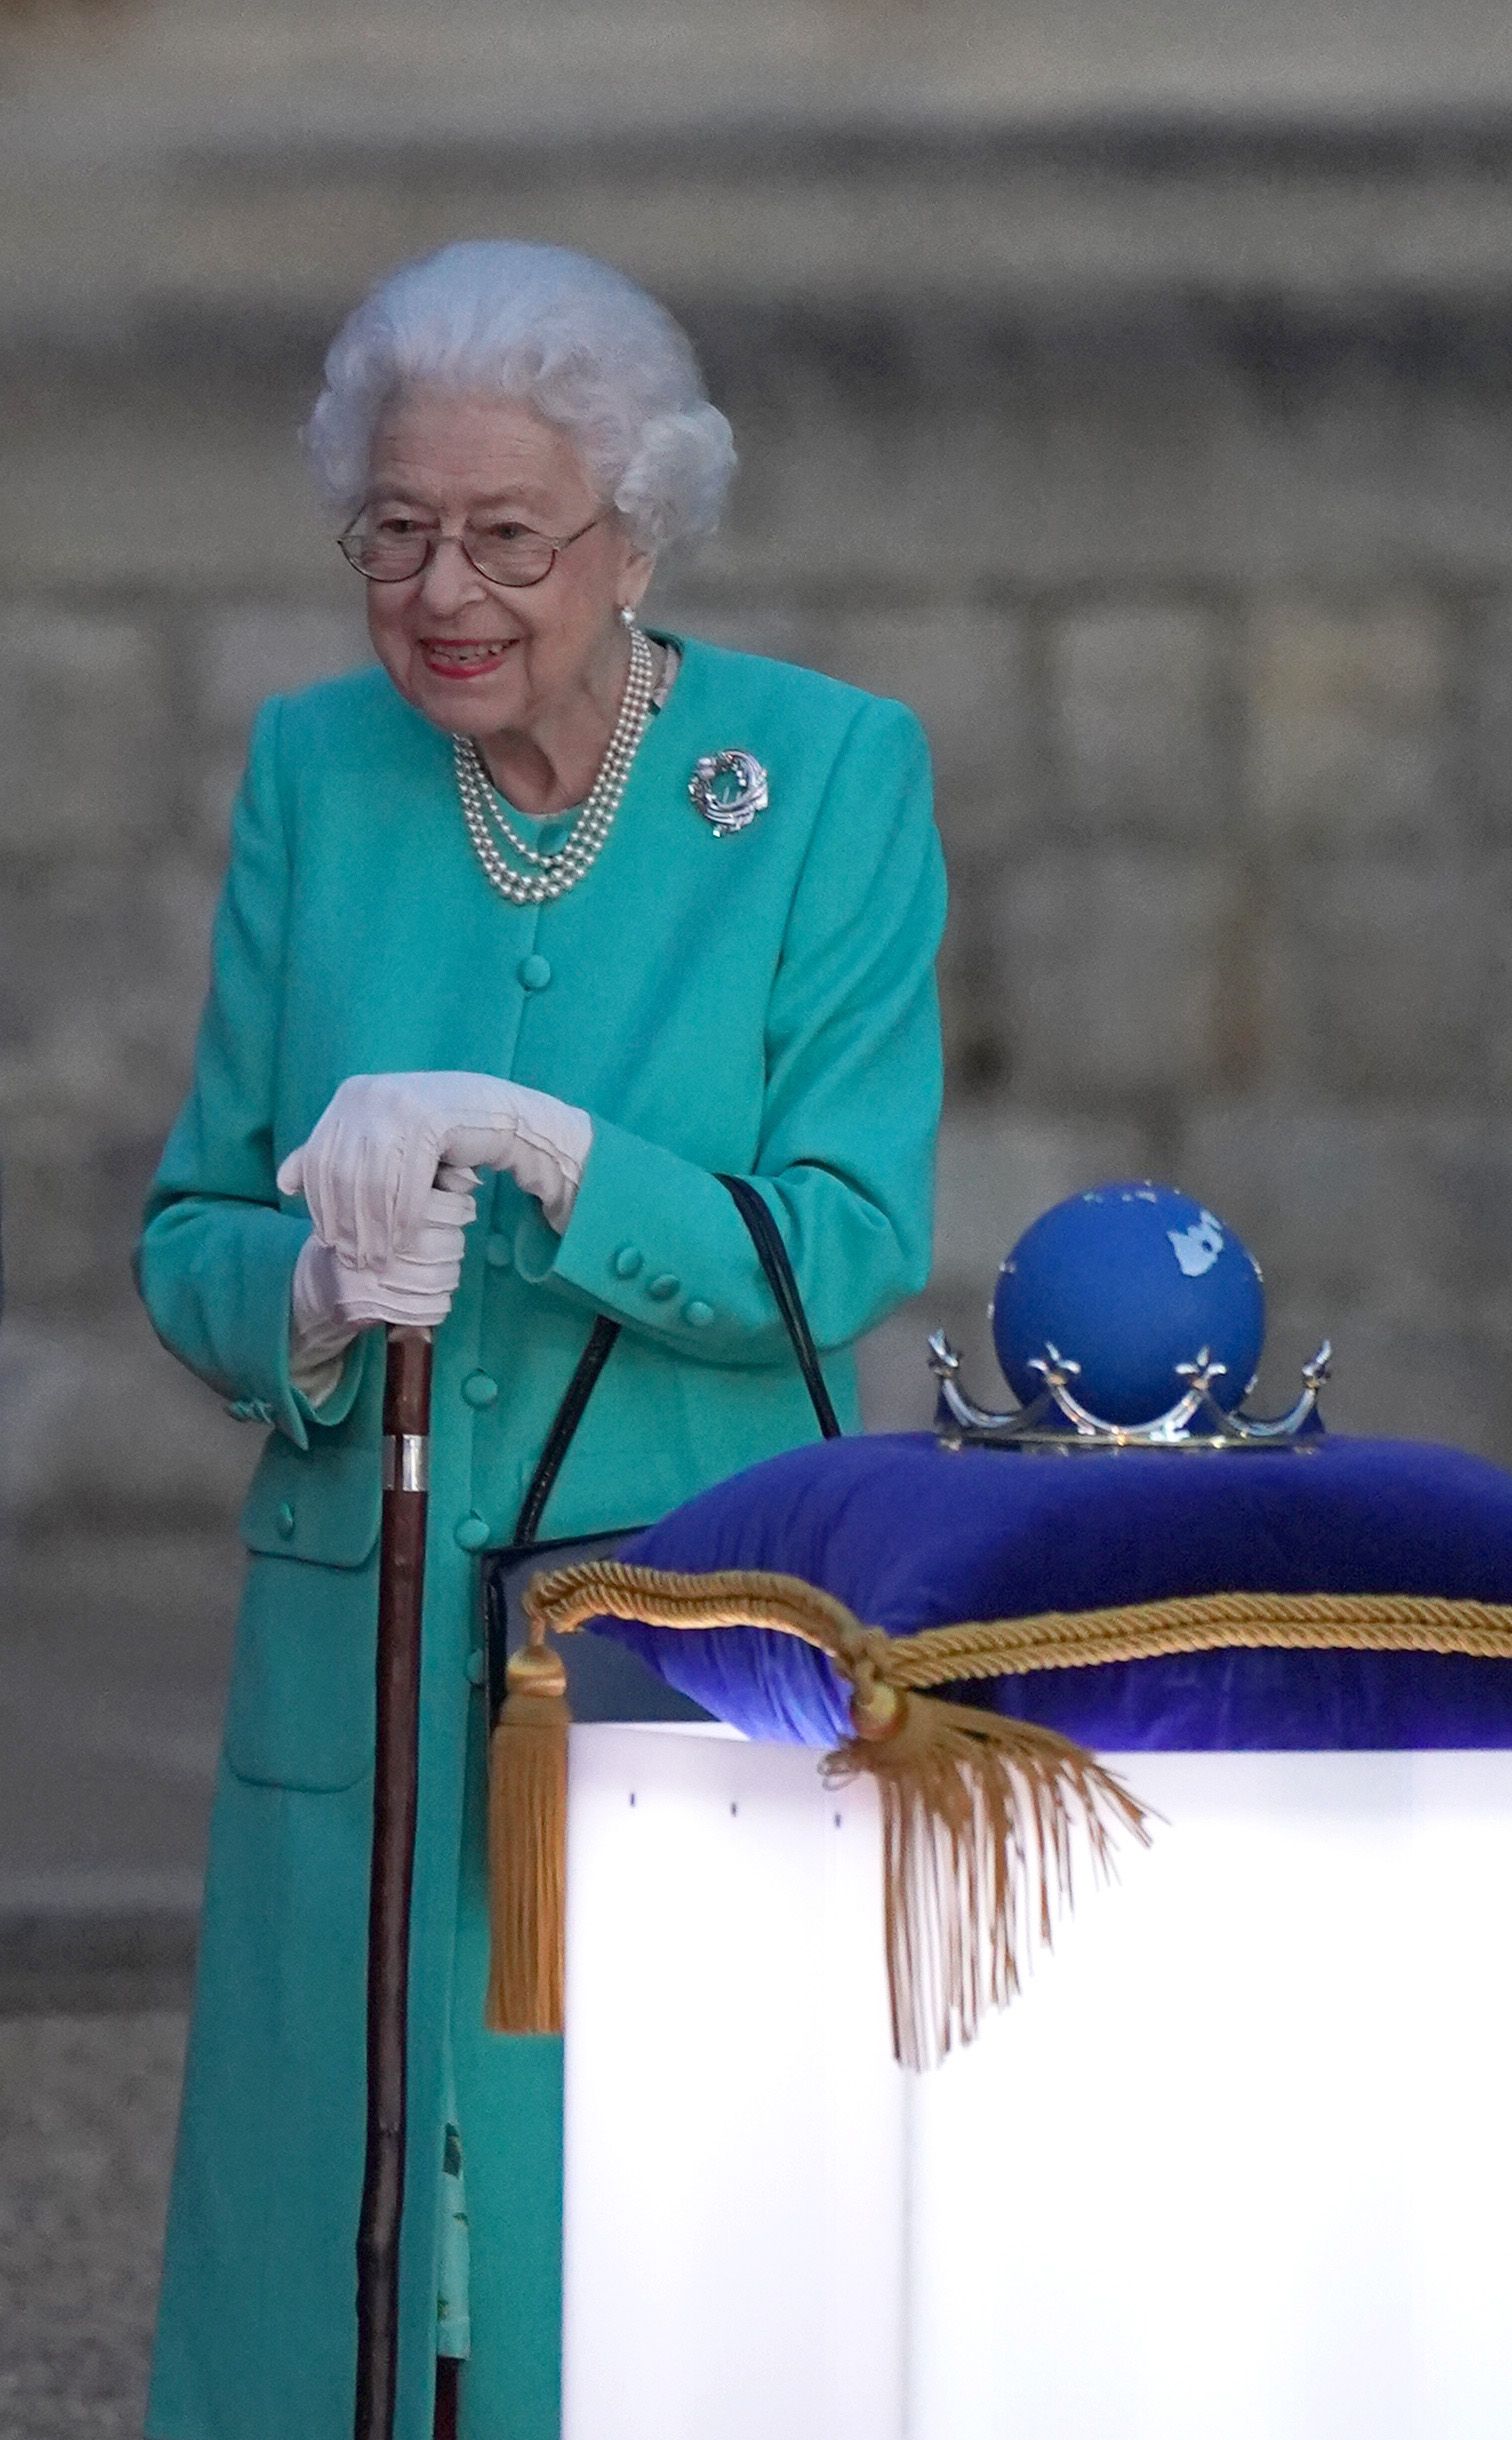 Queen Elizabeth Appears to Have Gotten a Haircut